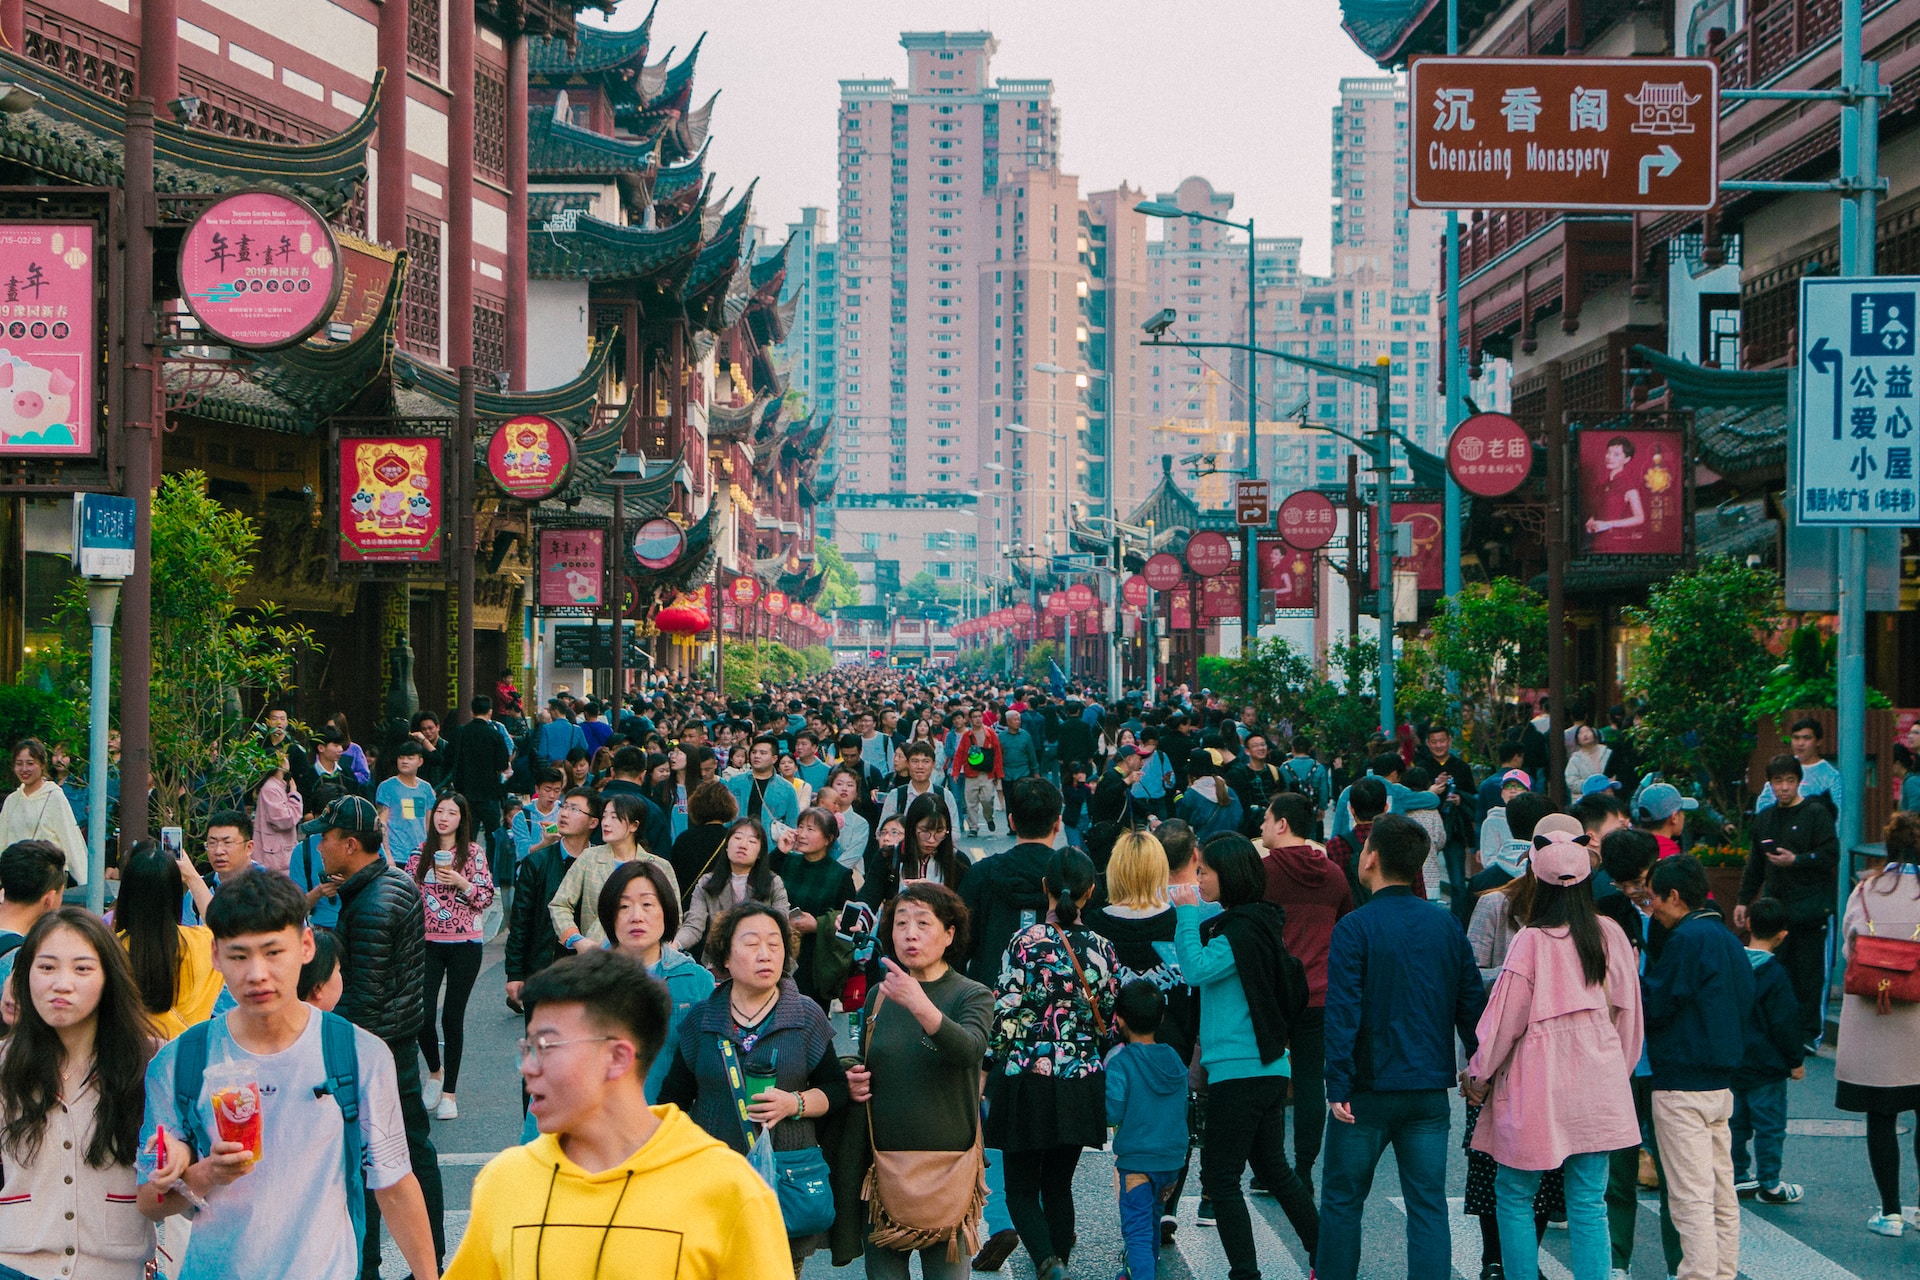 A crowd of people walking down a bustling street in an Asian city, exhibiting China's influence through its booming international trade.